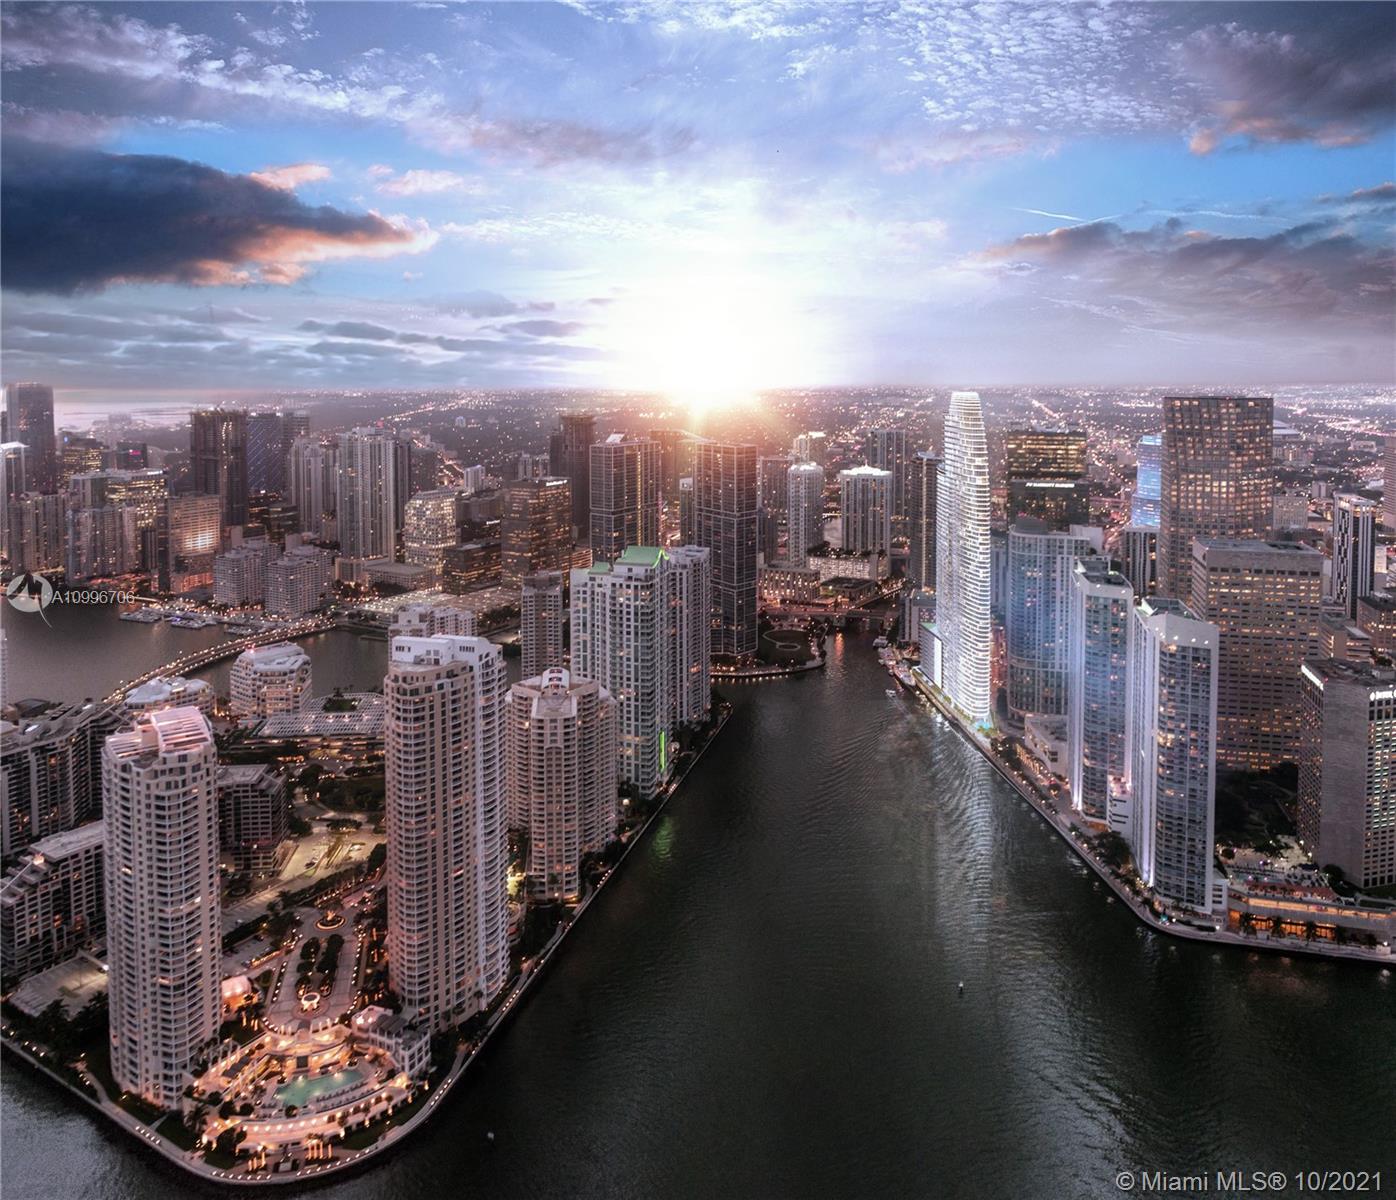 Your home in the sky. Construction is well underway. Aston Martin's first exclusively branded residential high rise with an estimated delivery in 2022. In this first exclusive development partnership with Aston Martin, the interiors are inspired by the brand's 105 year history, DNA and esthetic through subtle details and craftsmanship while taking into consideration Miami's tropical and exciting environment. The residential only tower will be over 800' as the tallest condominium tower south of NYC with 391 units, over 42,000 sq ft of sky amenities and timeless finishes.